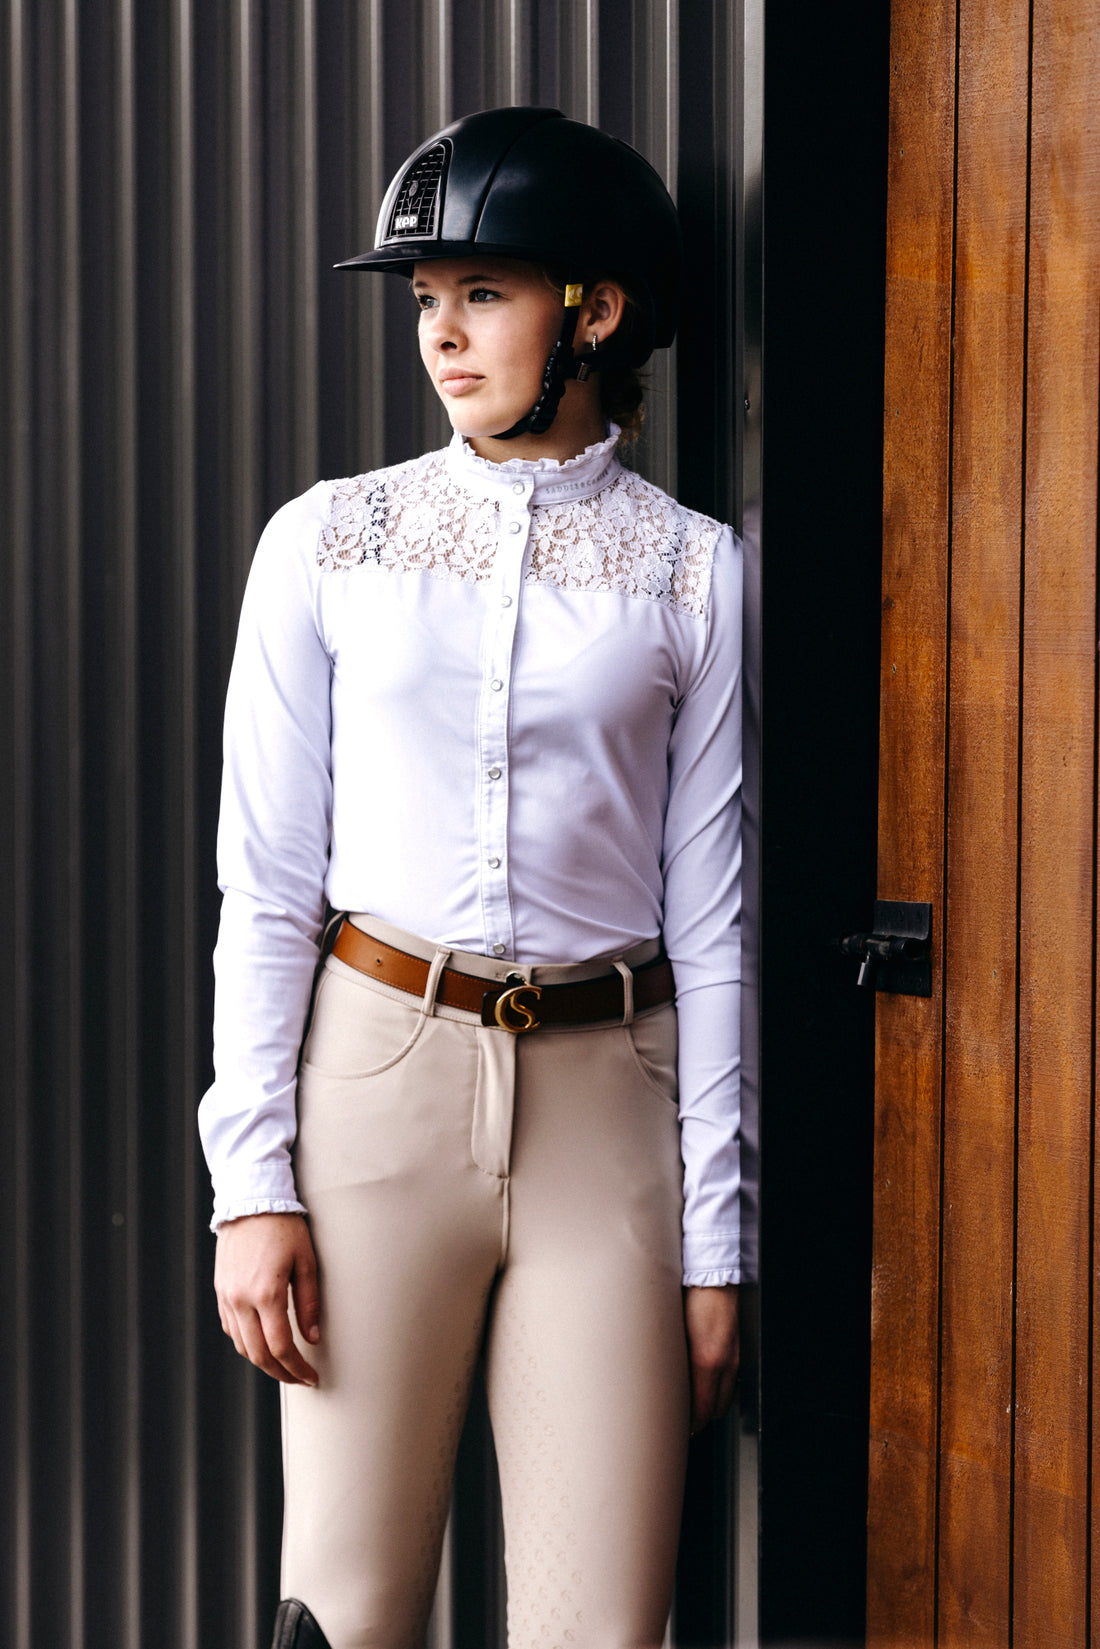 Specials on Riding Apparel. Save 10% on Equestrian Clothing